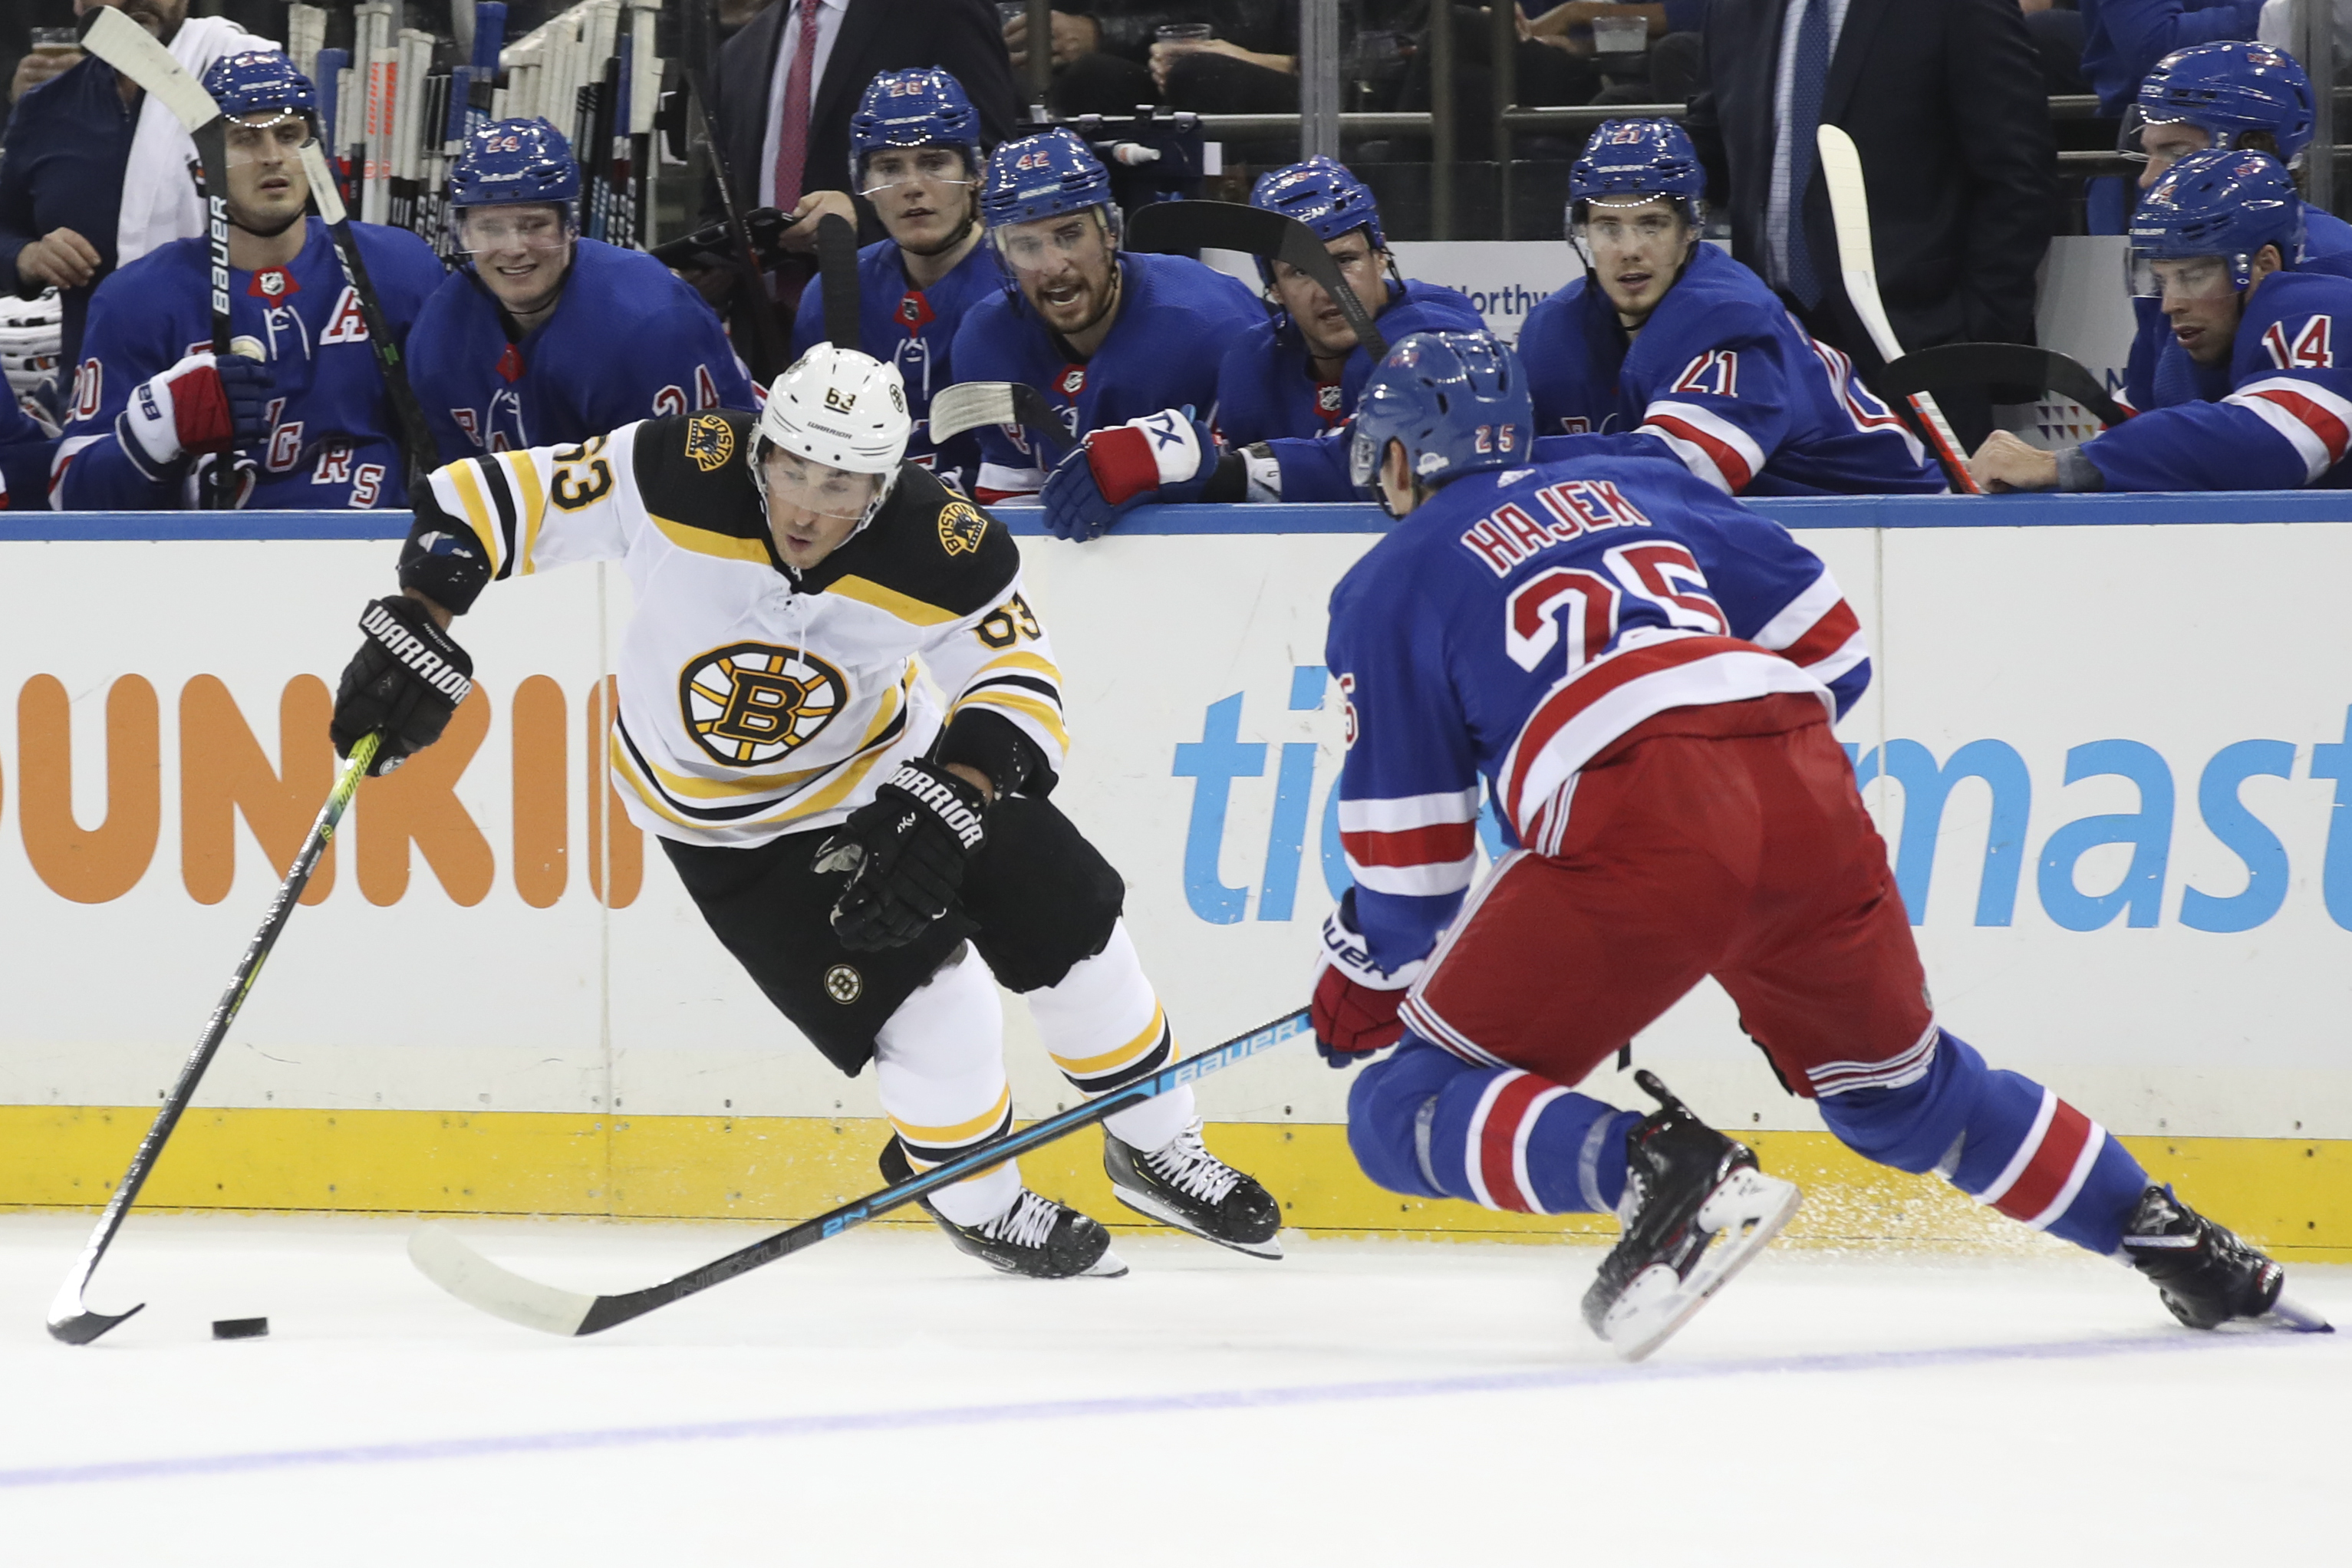 Marchand, Bergeron lead Bruins to 7-4 win over Rangers